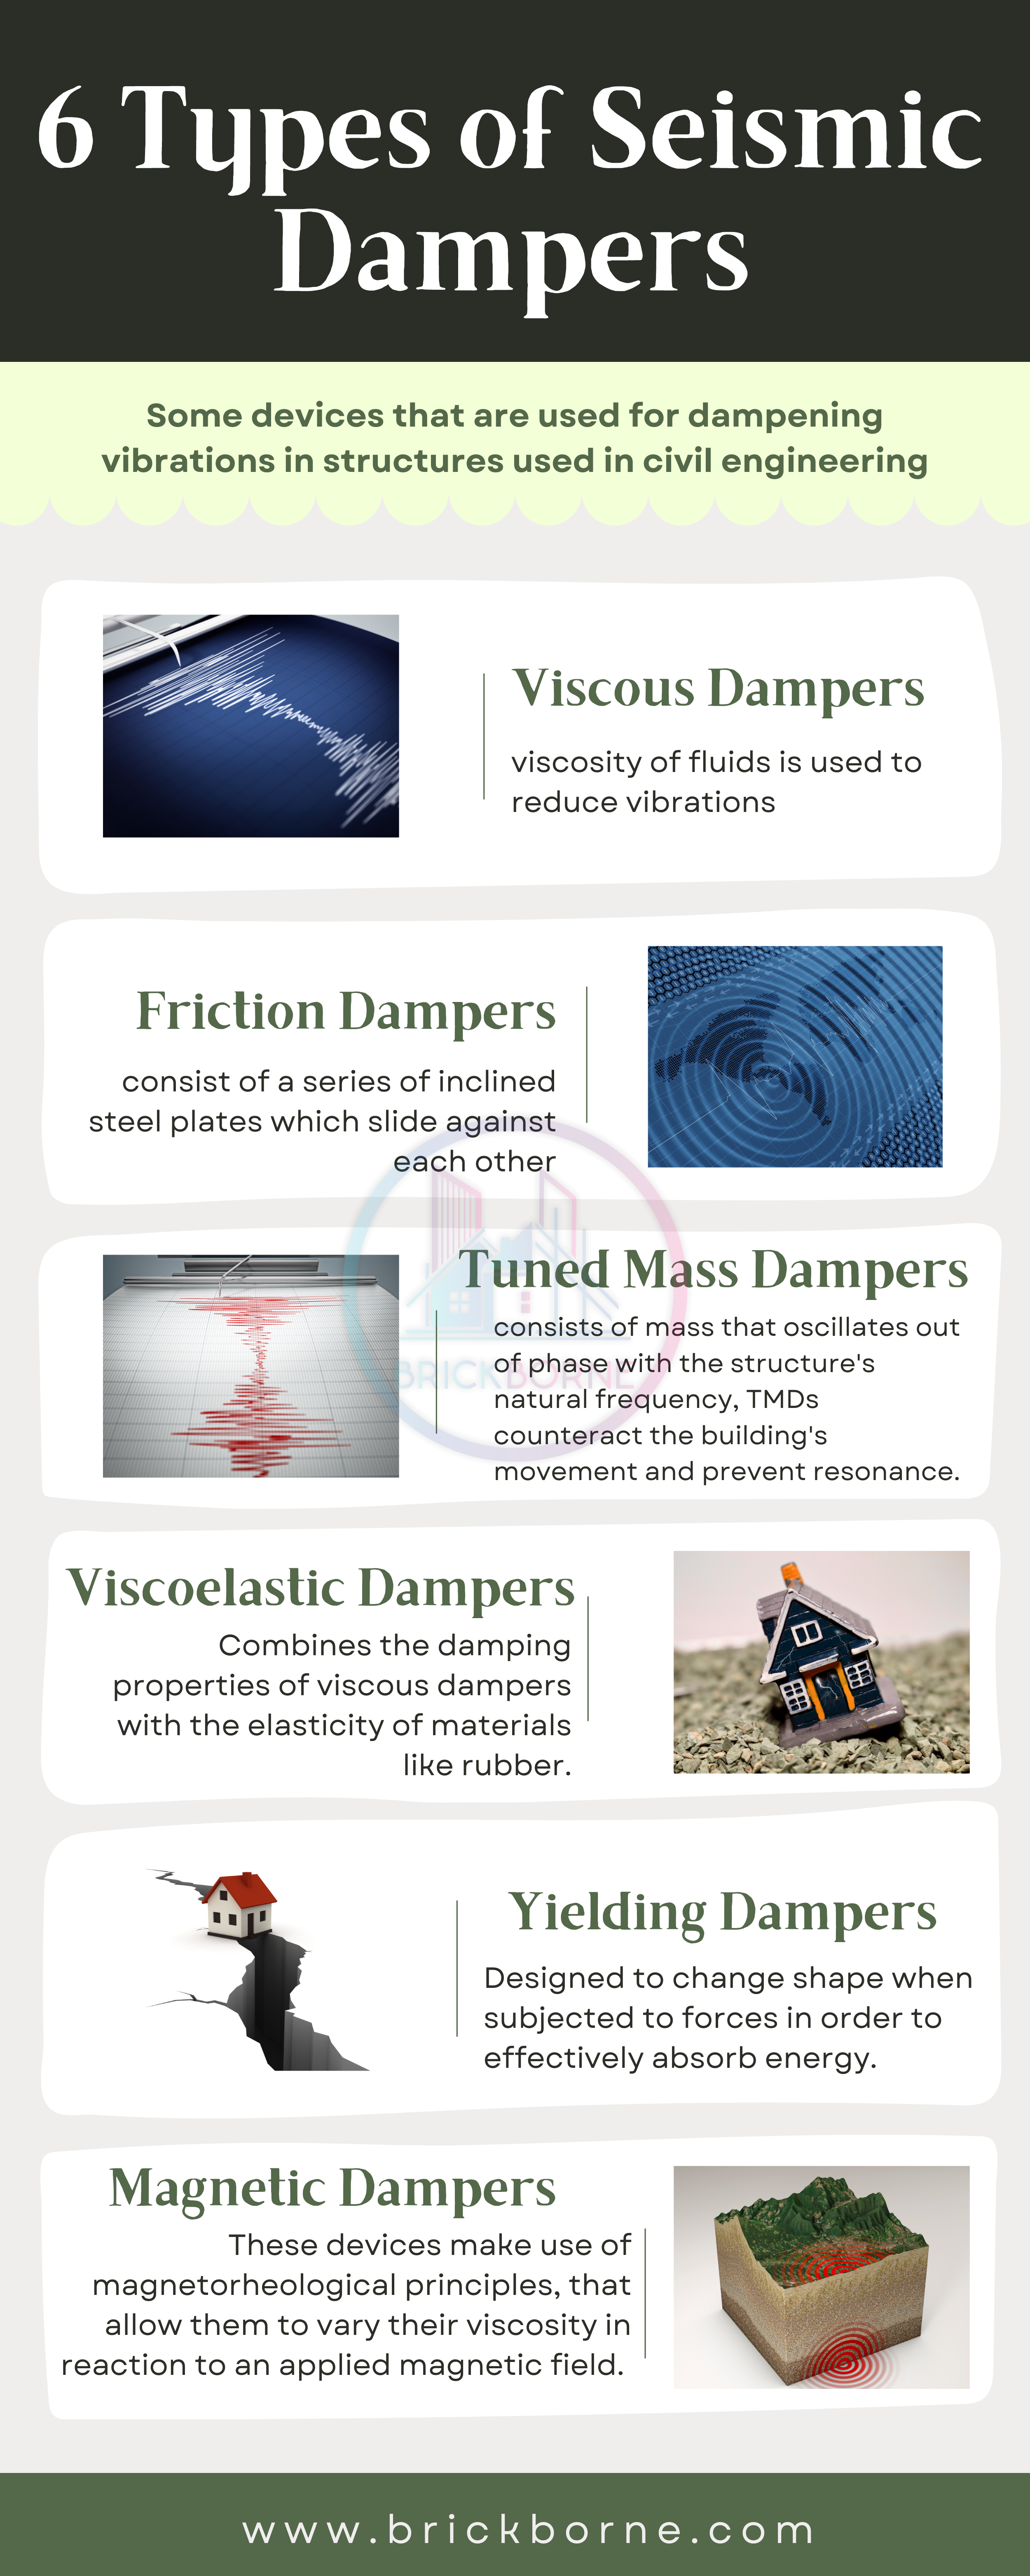 Types of seismic dampers